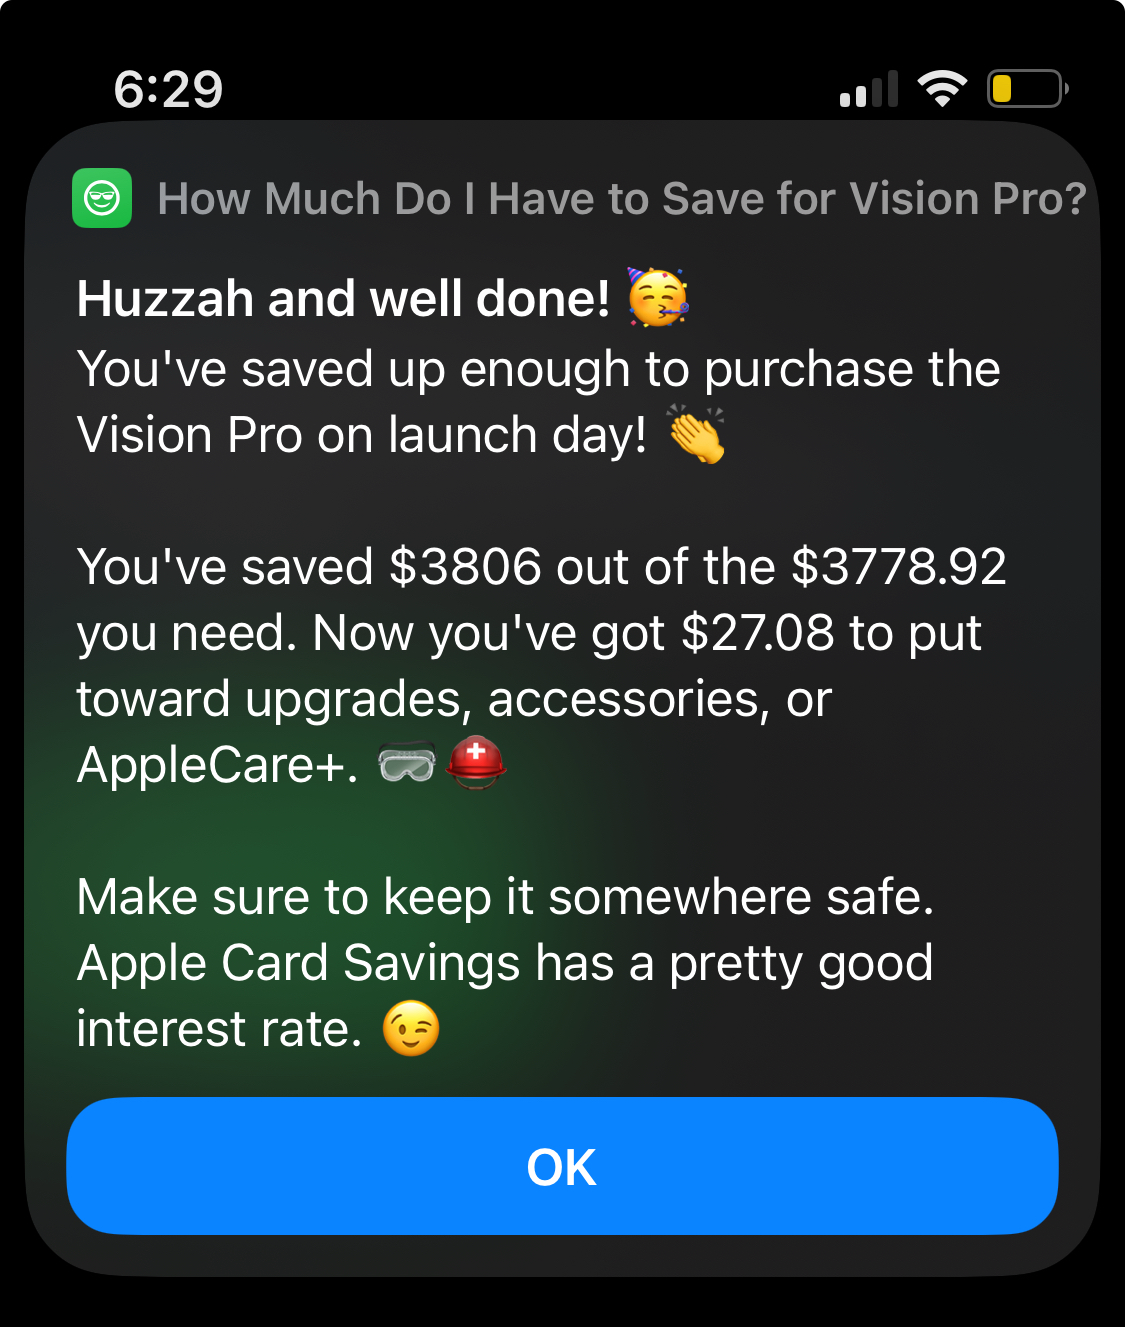 An iPhone alert saying “Huzzah and well done! You&rsquo;ve saved up enough to purchase the Vision Pro on launch day! You&rsquo;ve saved $3806 out of the $3778.92 you need. Now you&rsquo;ve got $27.08 to put toward upgrades, accessories, or AppleCare+. Make sure to keep it somewhere safe. Apple Card Savings has a pretty good interest rate.&quot;